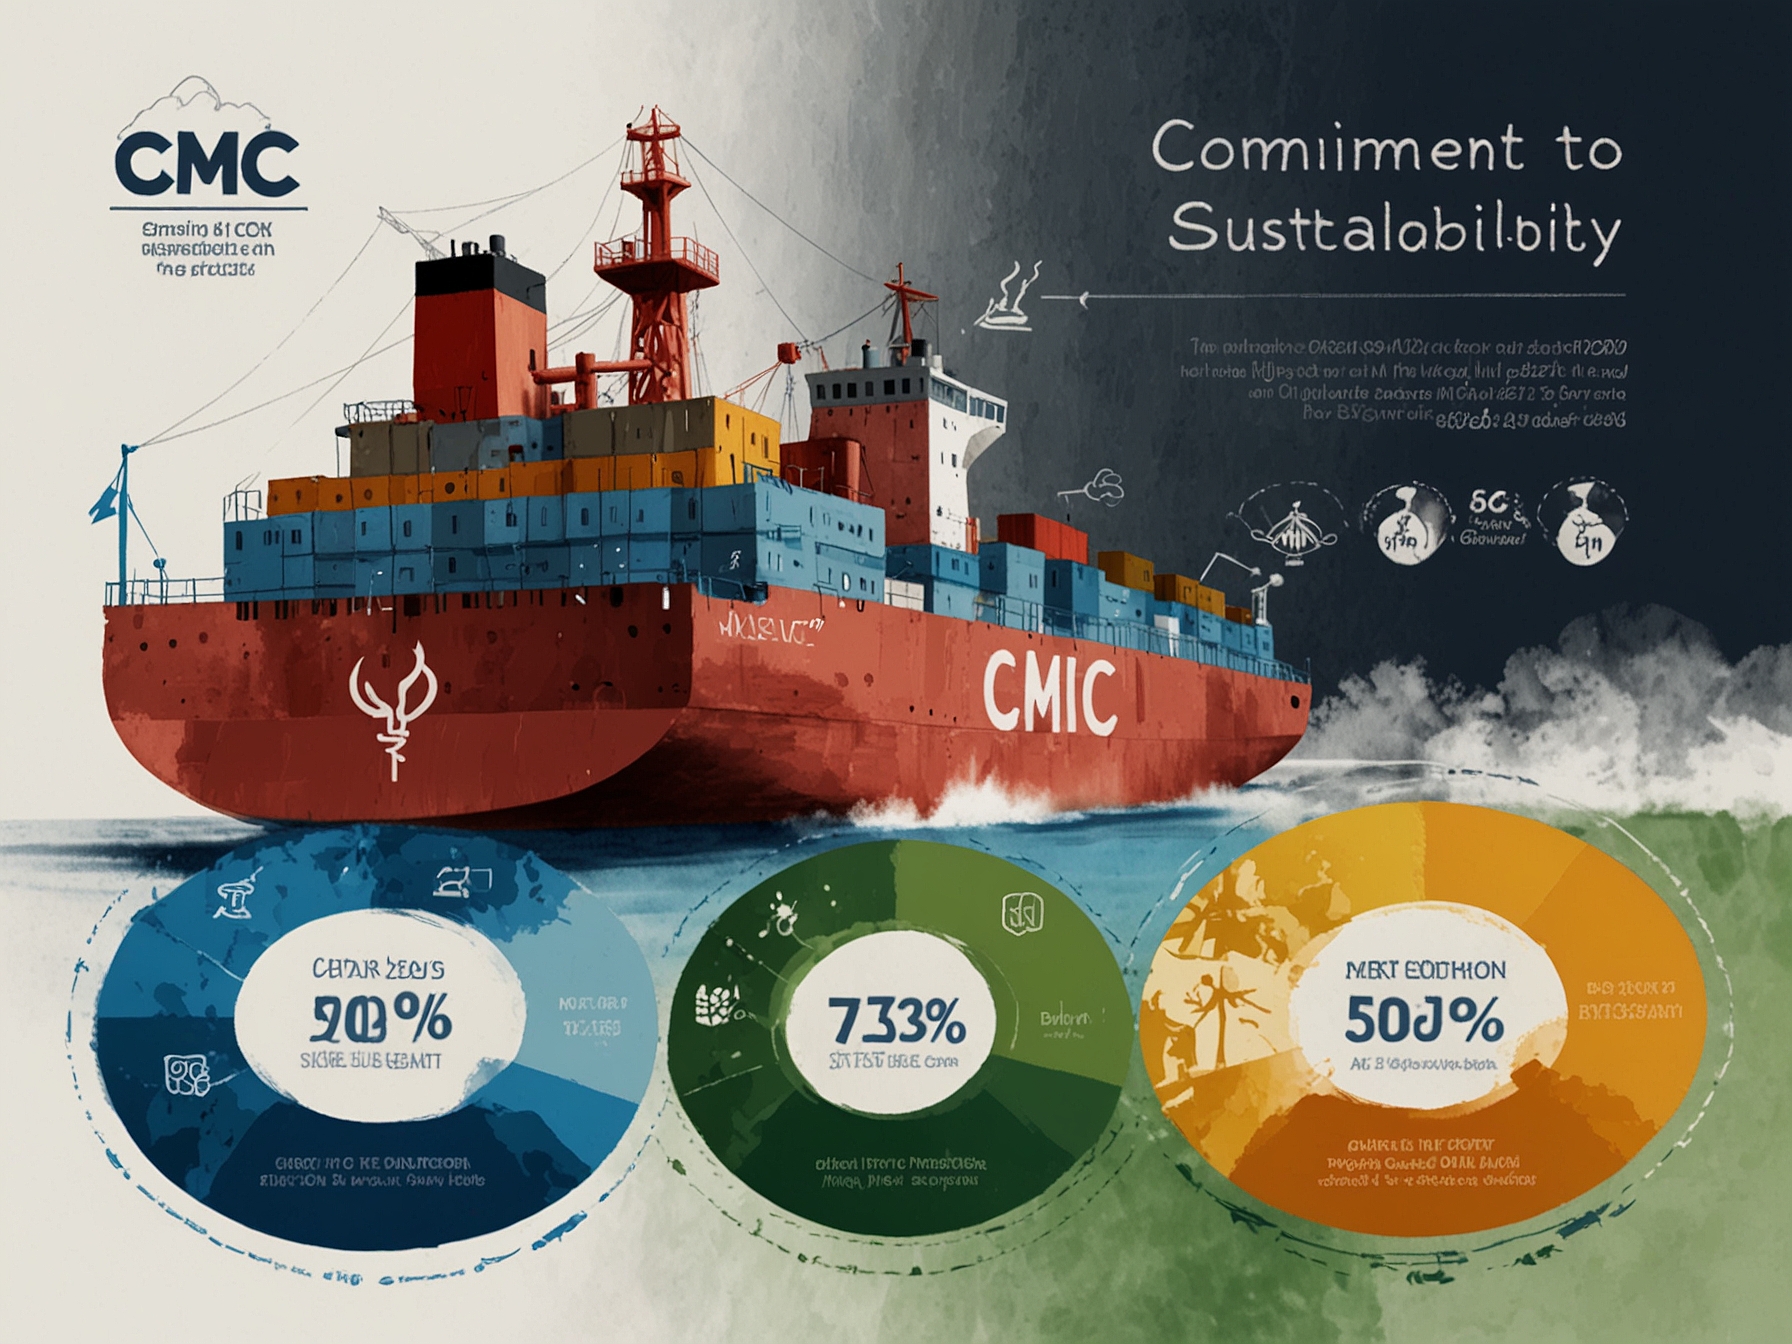 An infographic depicting CMC's commitment to sustainability, including a 5% reduction in carbon emissions for Q3 2024, aligning with their goal of net-zero carbon emissions by 2050.